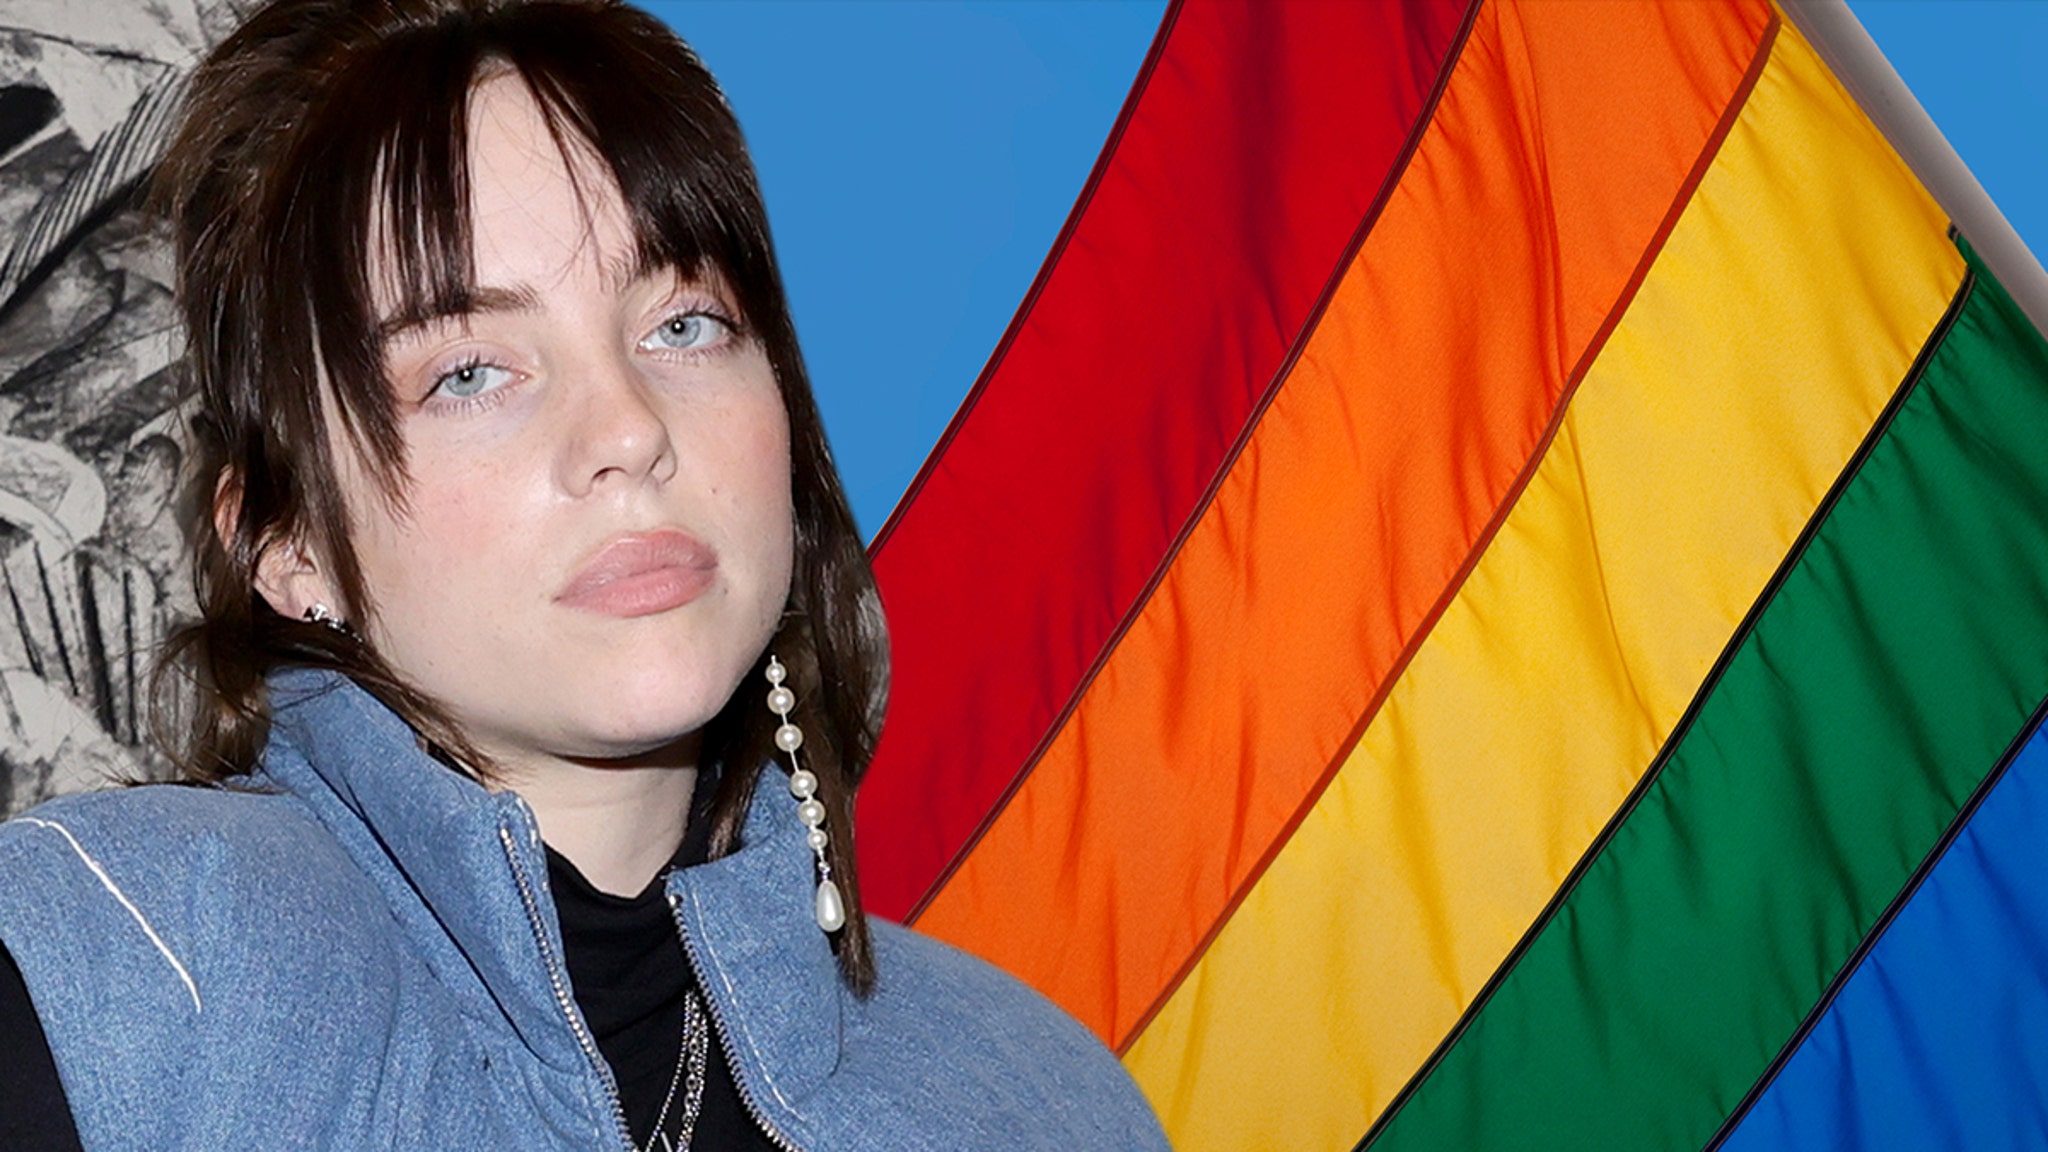 Billie Eilish Calls Out Variety for Outing Her on Red Carpet